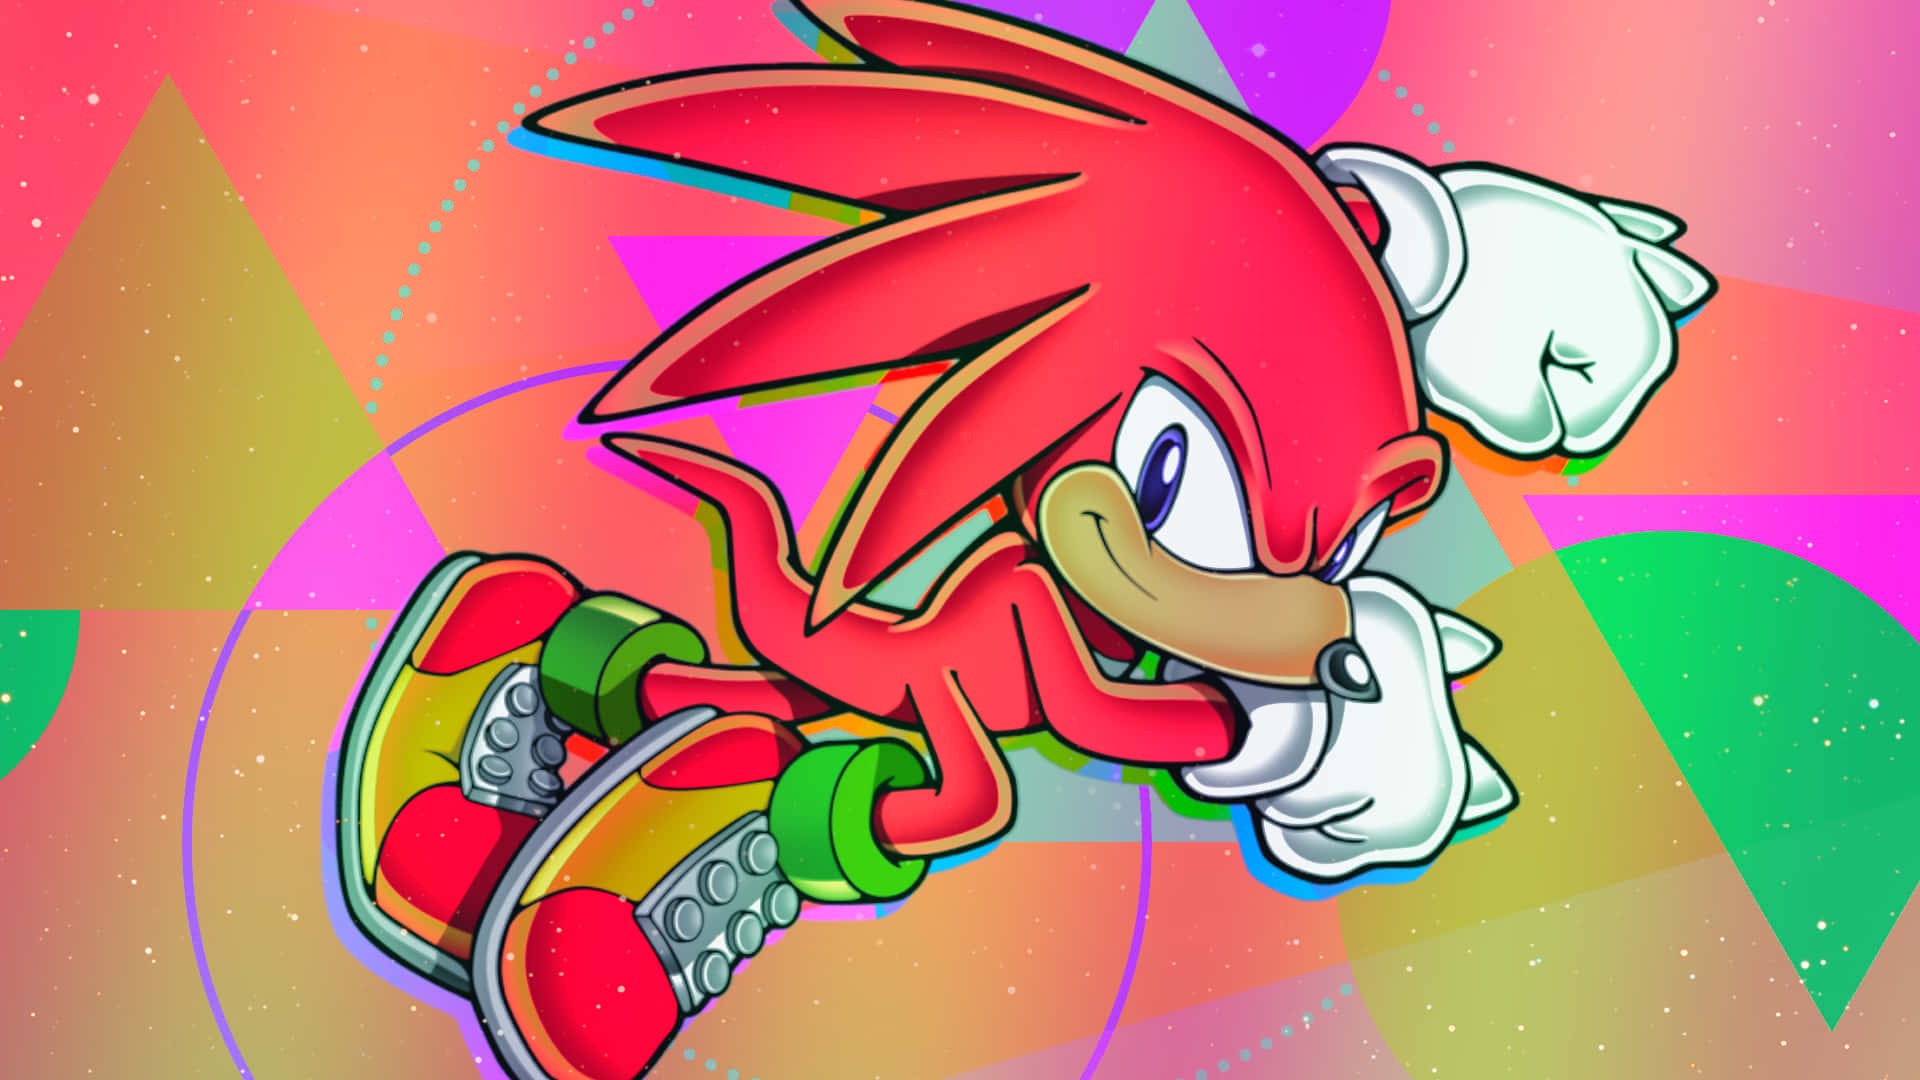 Get The Edge With Knuckles!